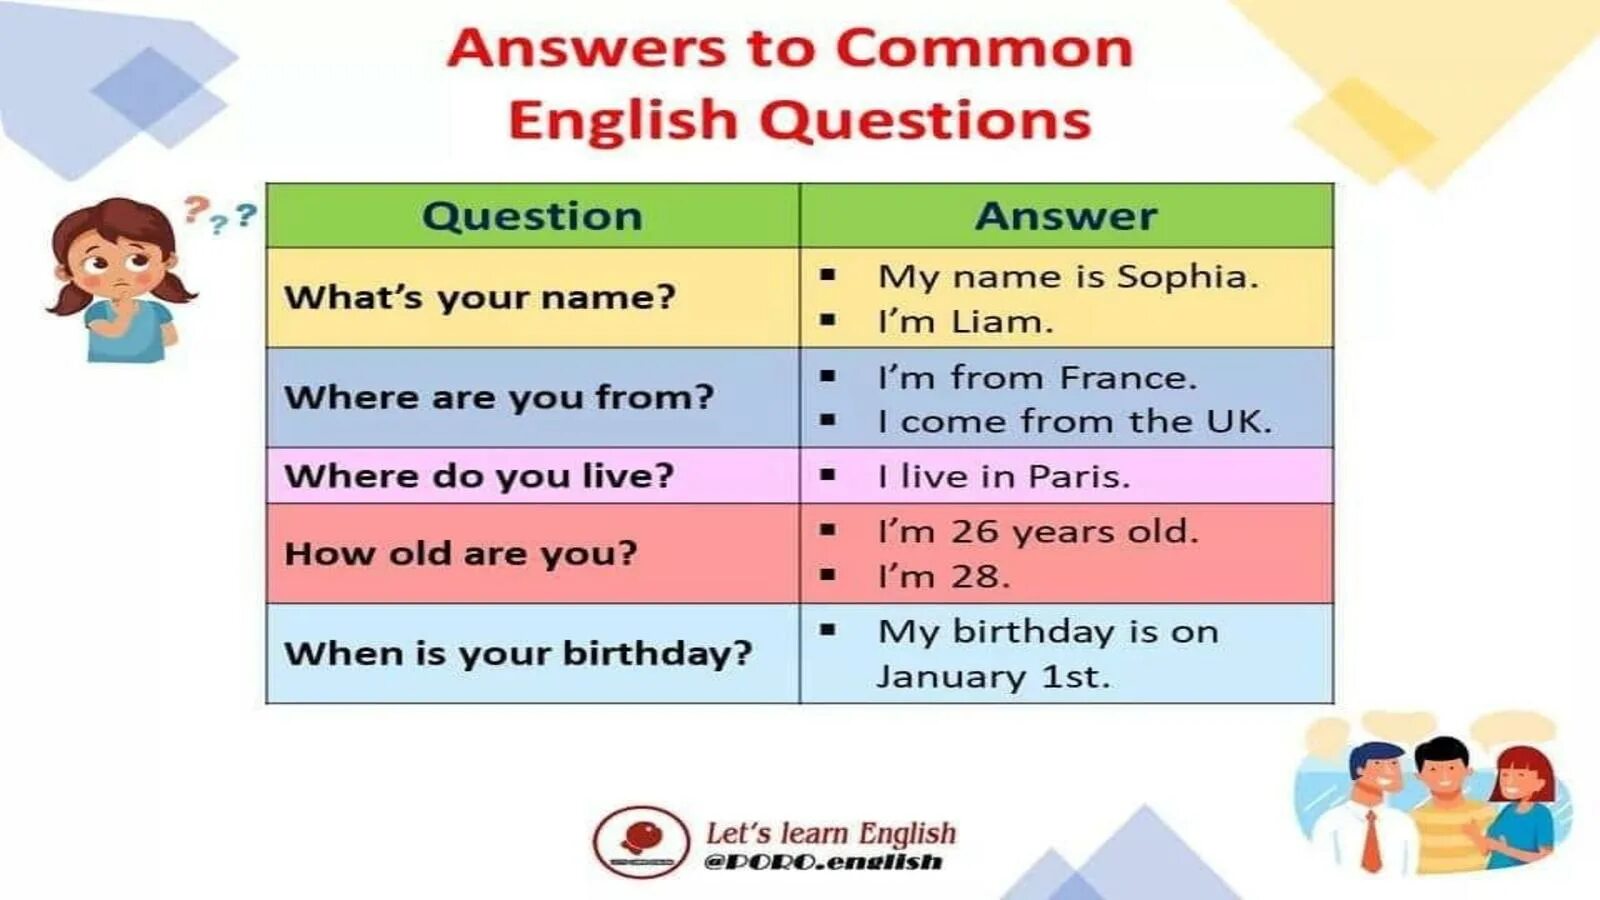 Top questions. Common questions в английском. English questions. Answer questions English. Basic questions in English.